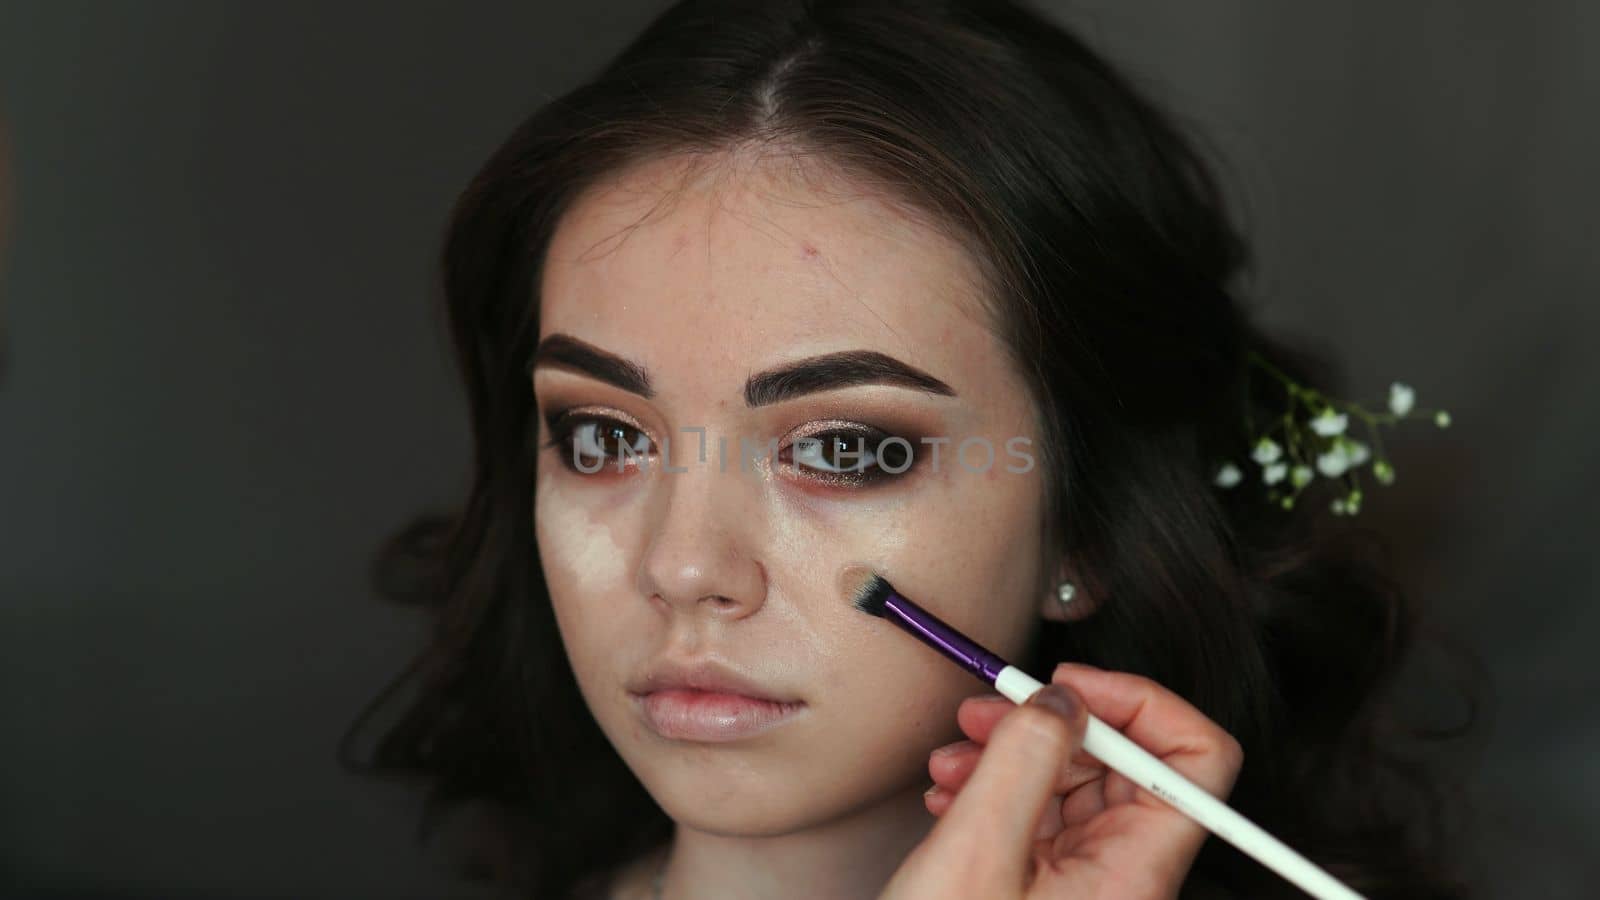 Makeup artist applies foundation on the face of the model